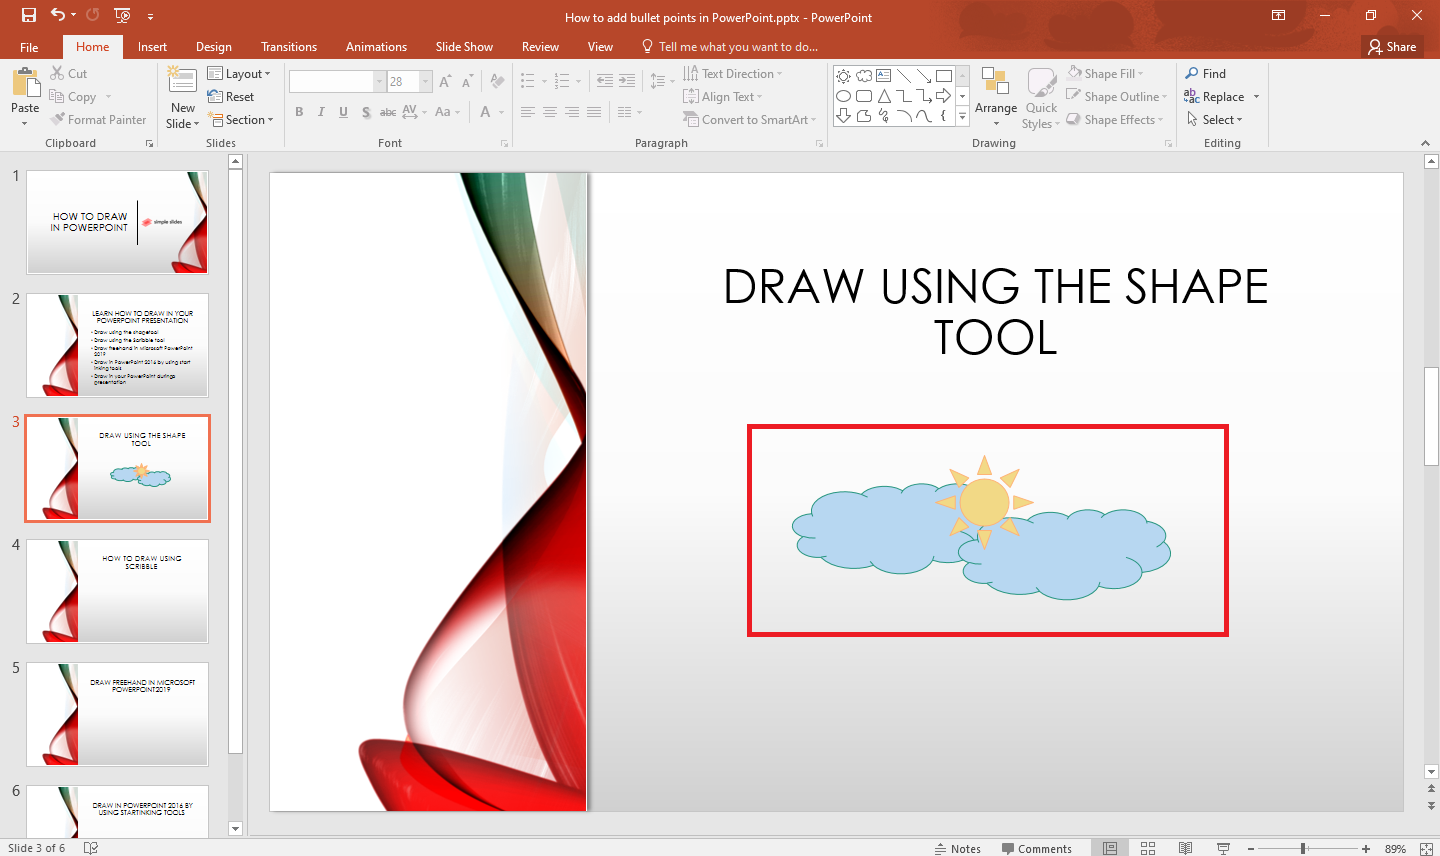 You can now create shapes in drawing form.